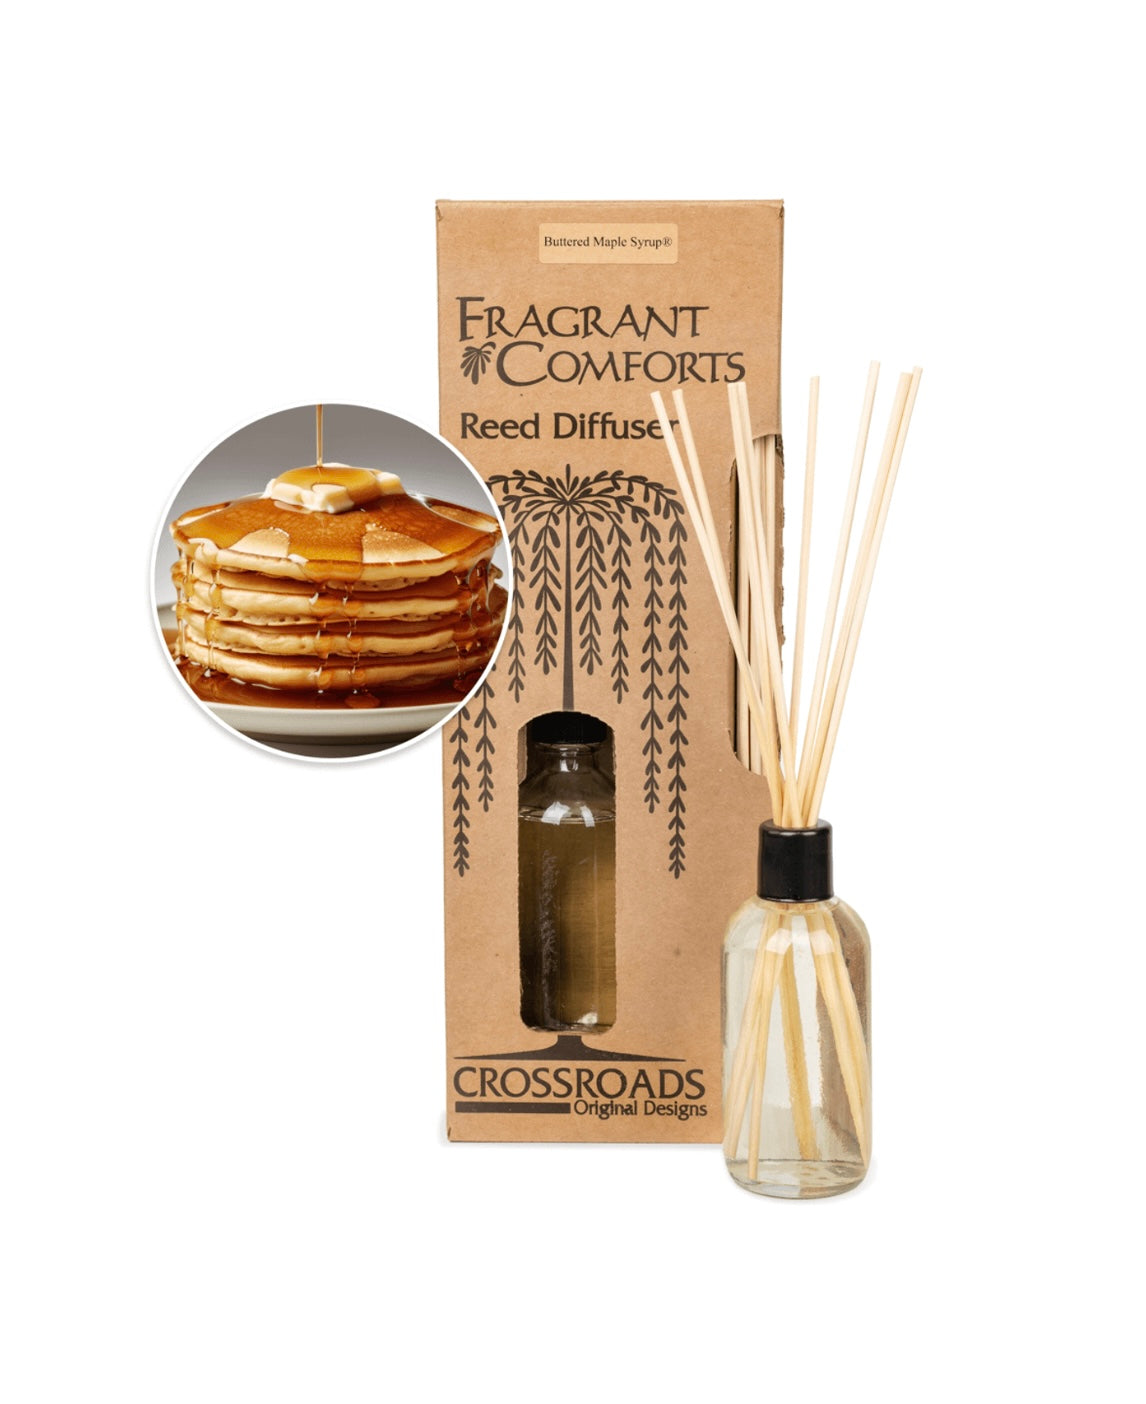 Buttered Maple Syrup Reed Diffuser